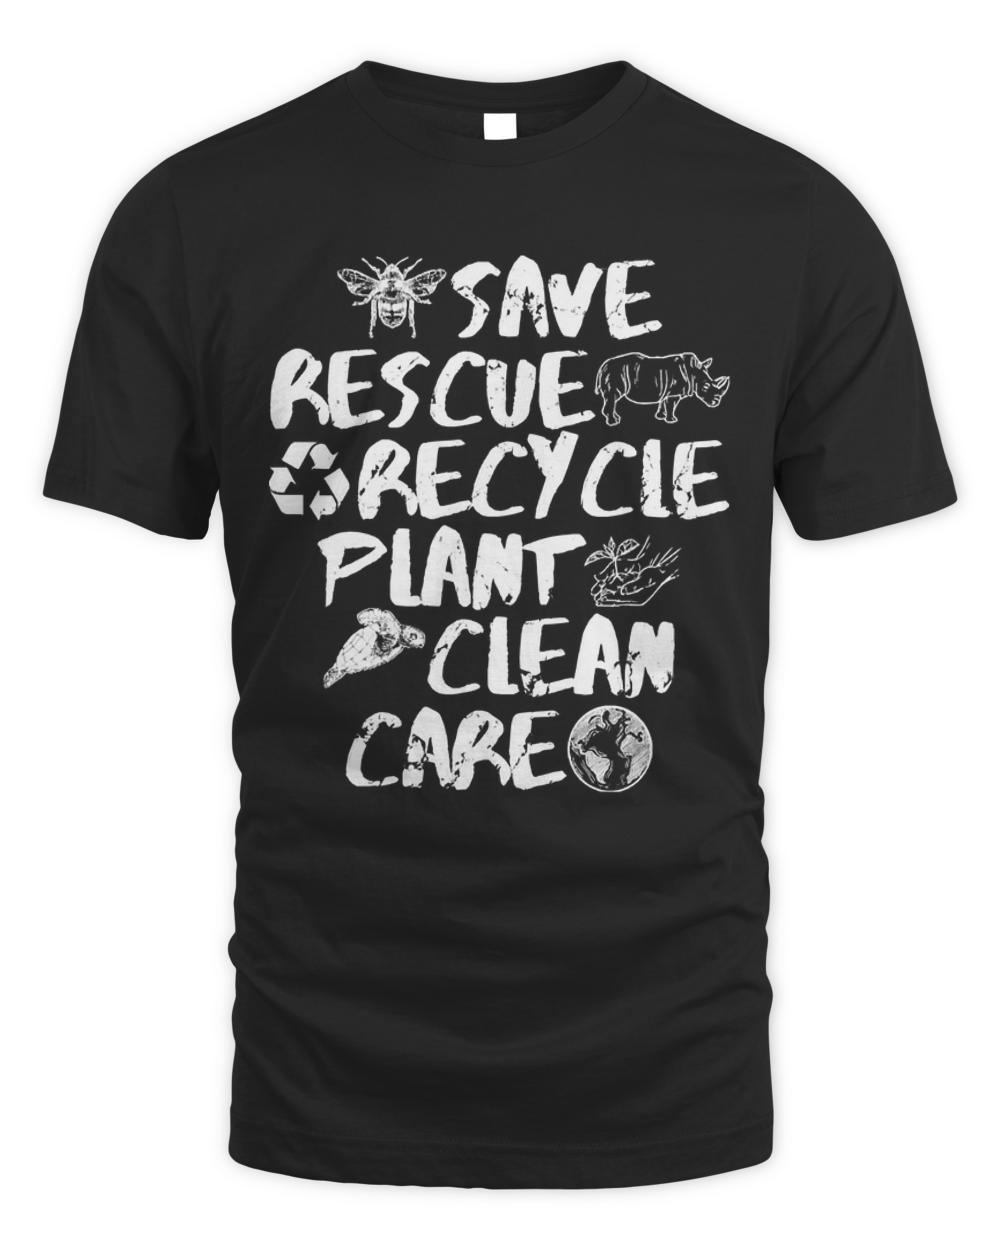 Global Warming T- Shirt Save rescue recycle plant clean care T- Shirt